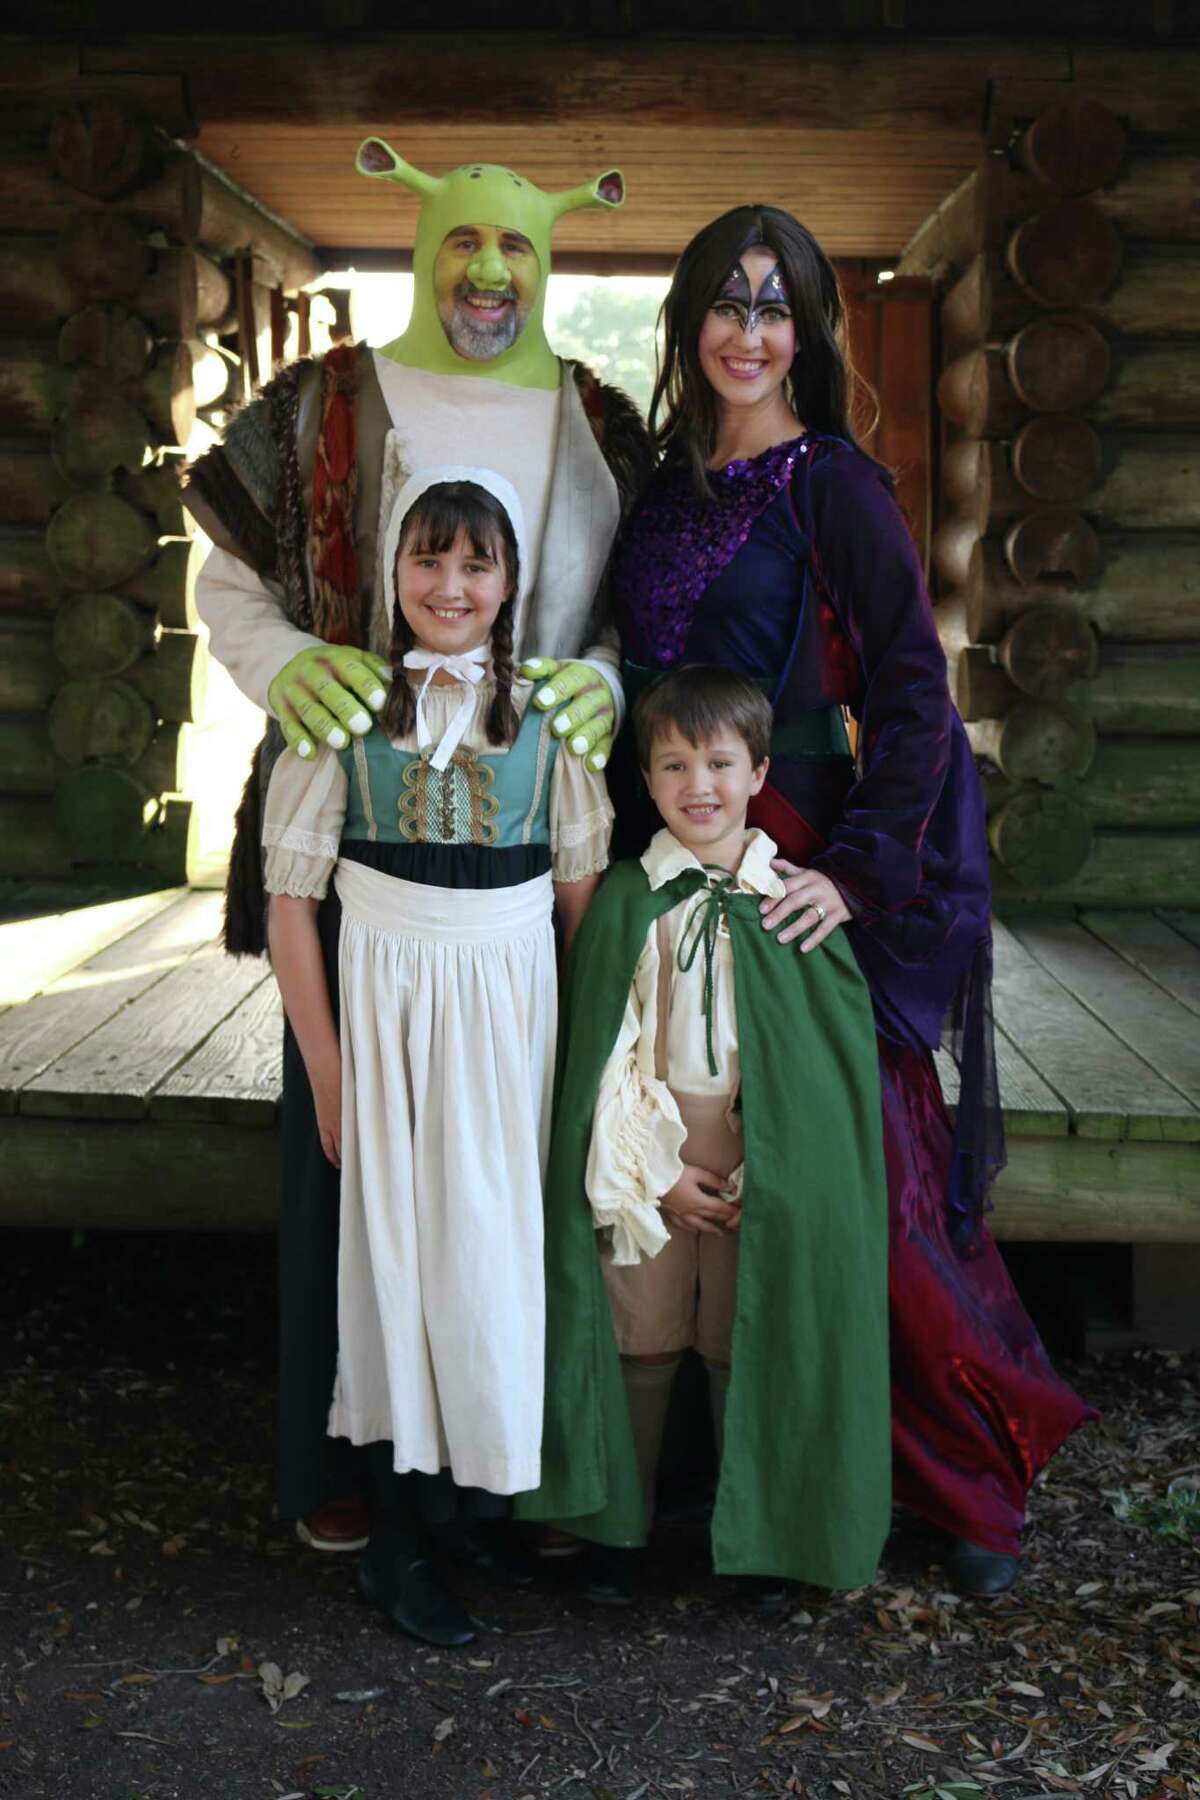 The Flenniken family, dad Scott, mom Nicole, and children Carlee, 10, and Will, 6, will perform in "Shrek the Musical" through July 23 at Art Park Players in Deer Park.